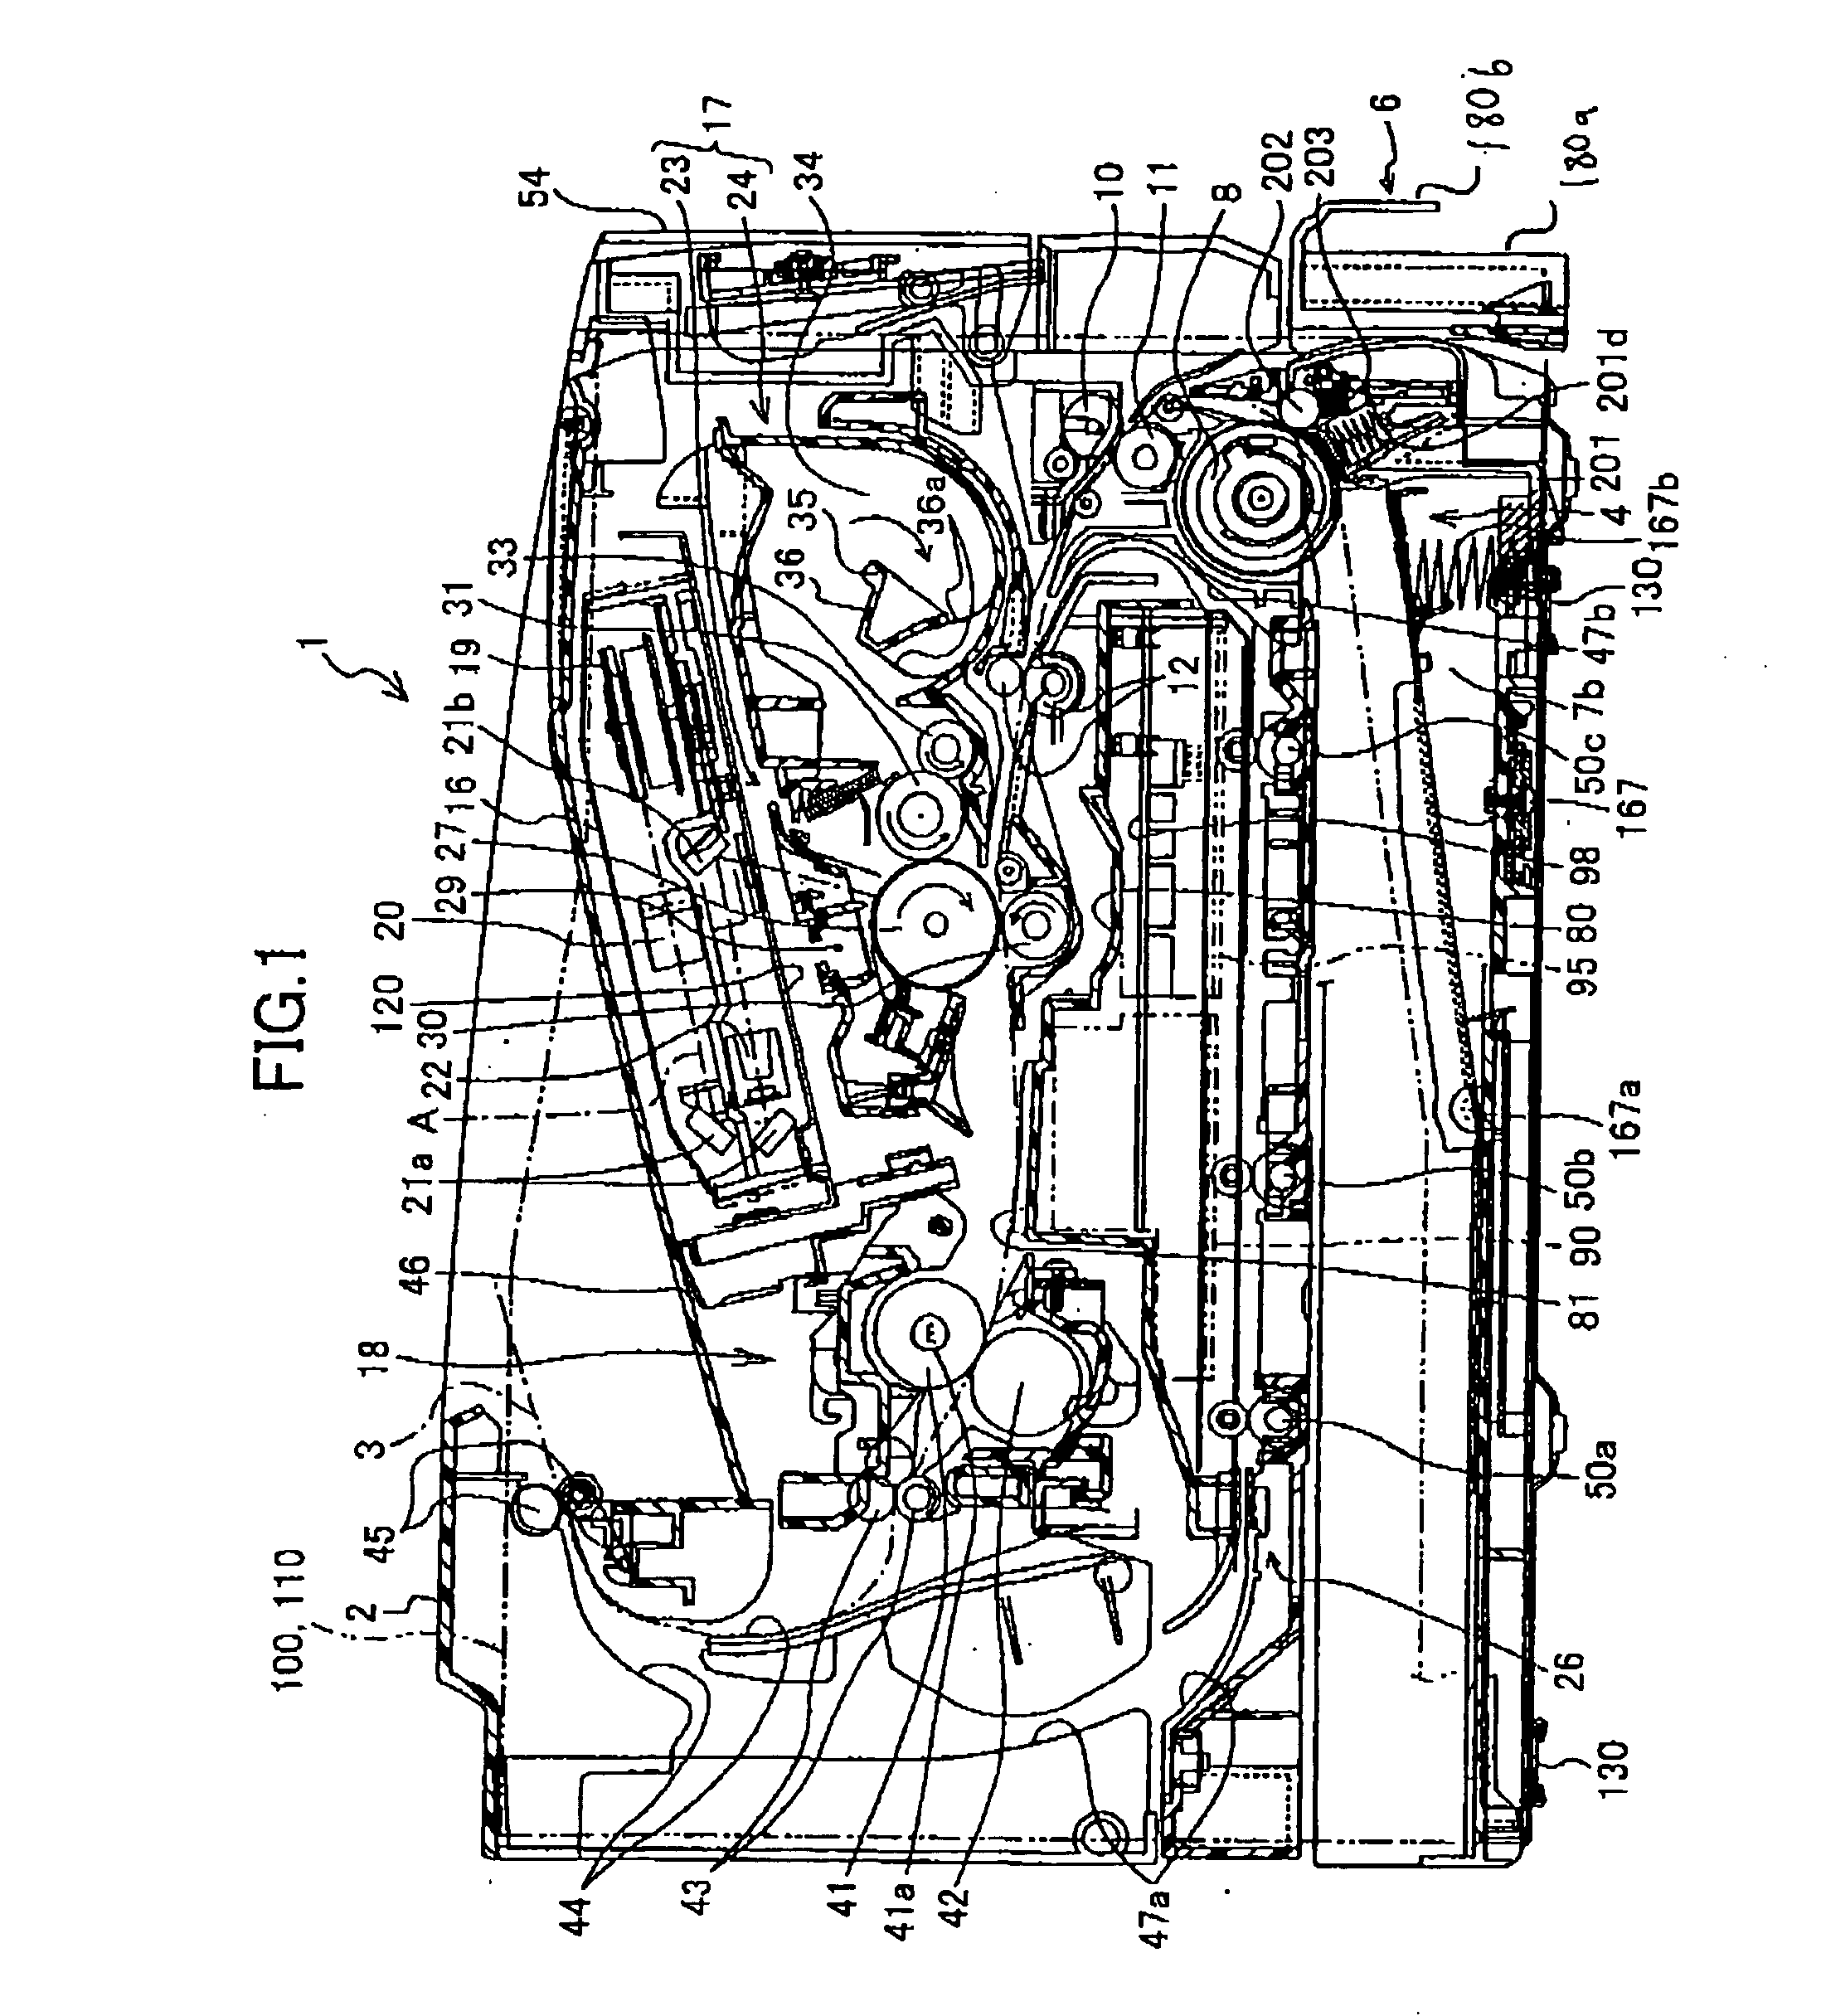 Paper supply cassette for an image forming device